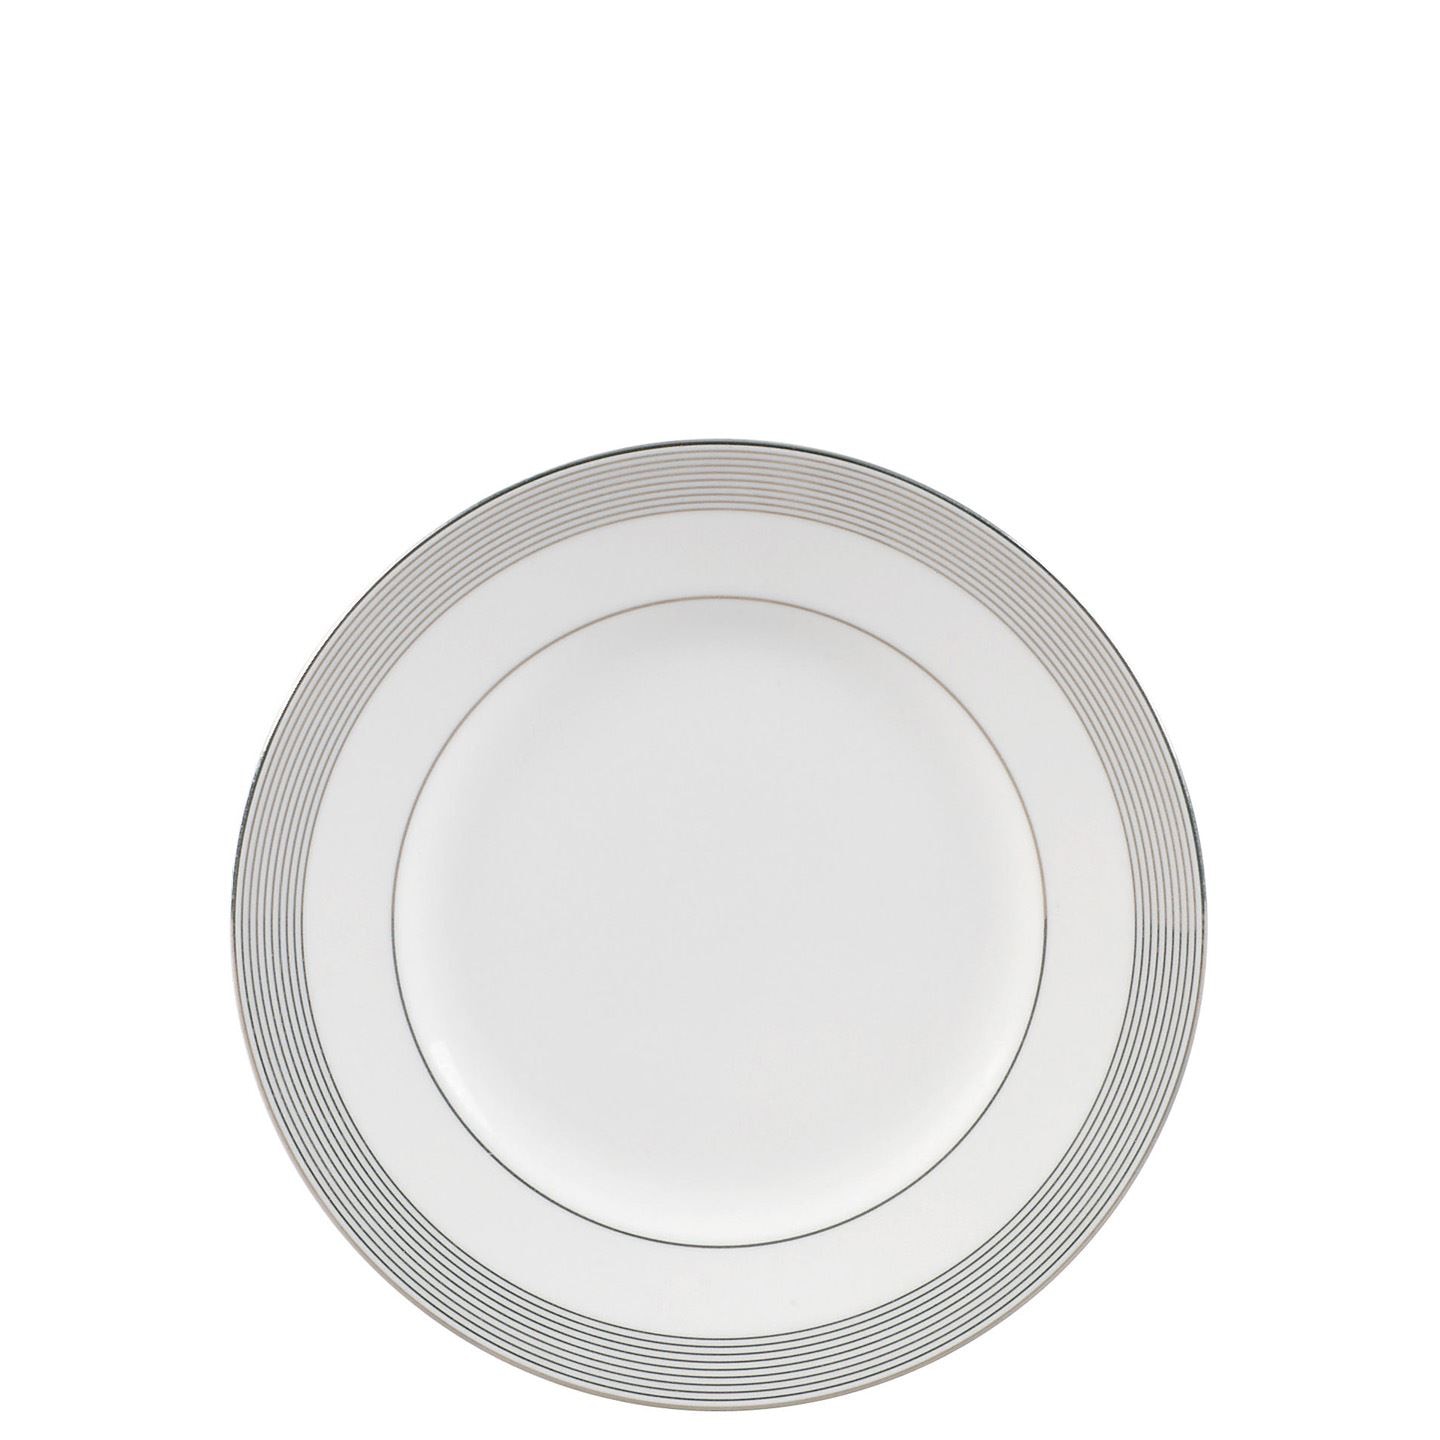 Grosgrain 5-Piece Place Setting Wedgwood